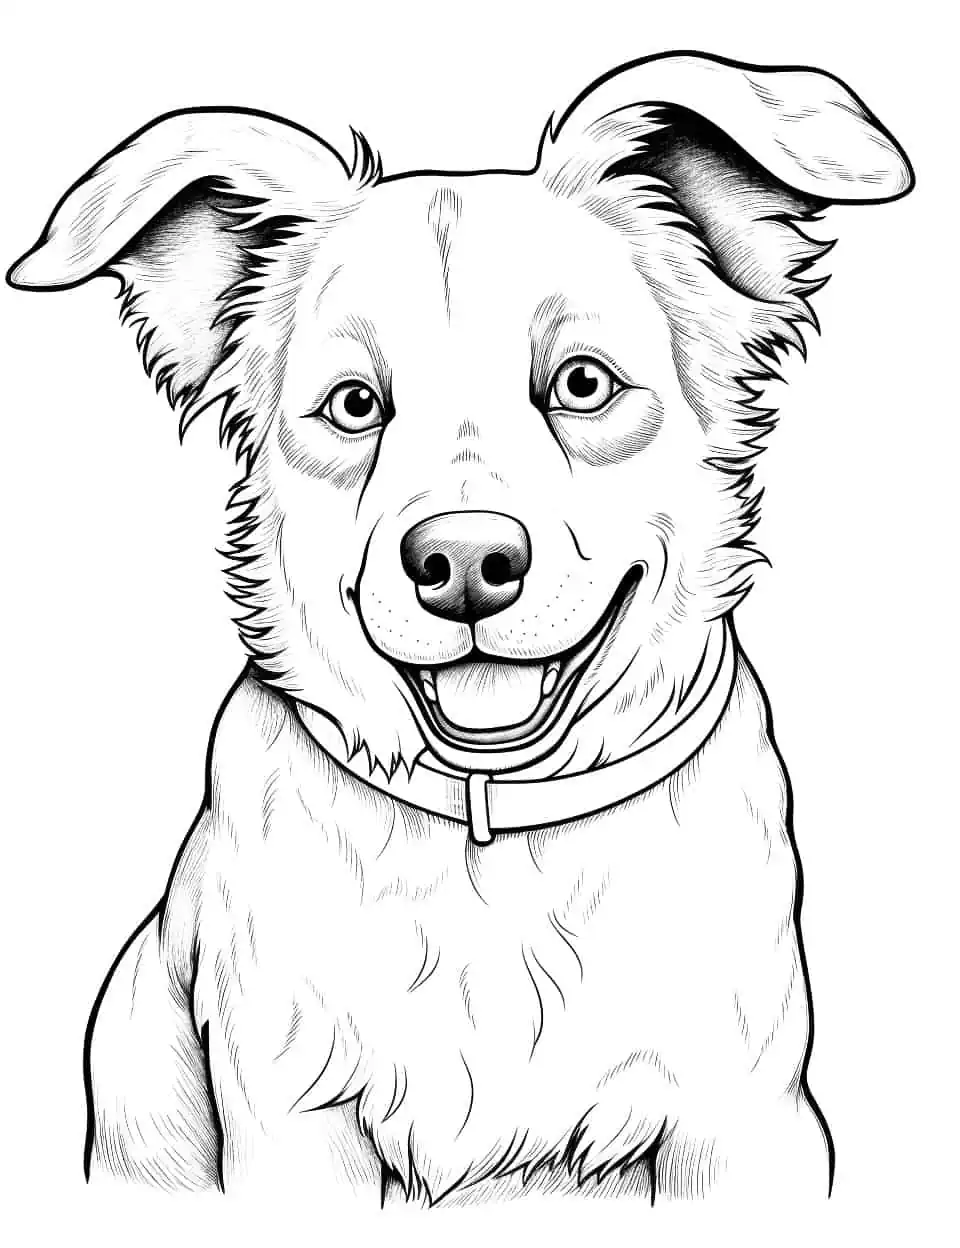 Advanced Border Collie Drawing Coloring Page - An advanced coloring page featuring a realistic and detailed Border Collie.